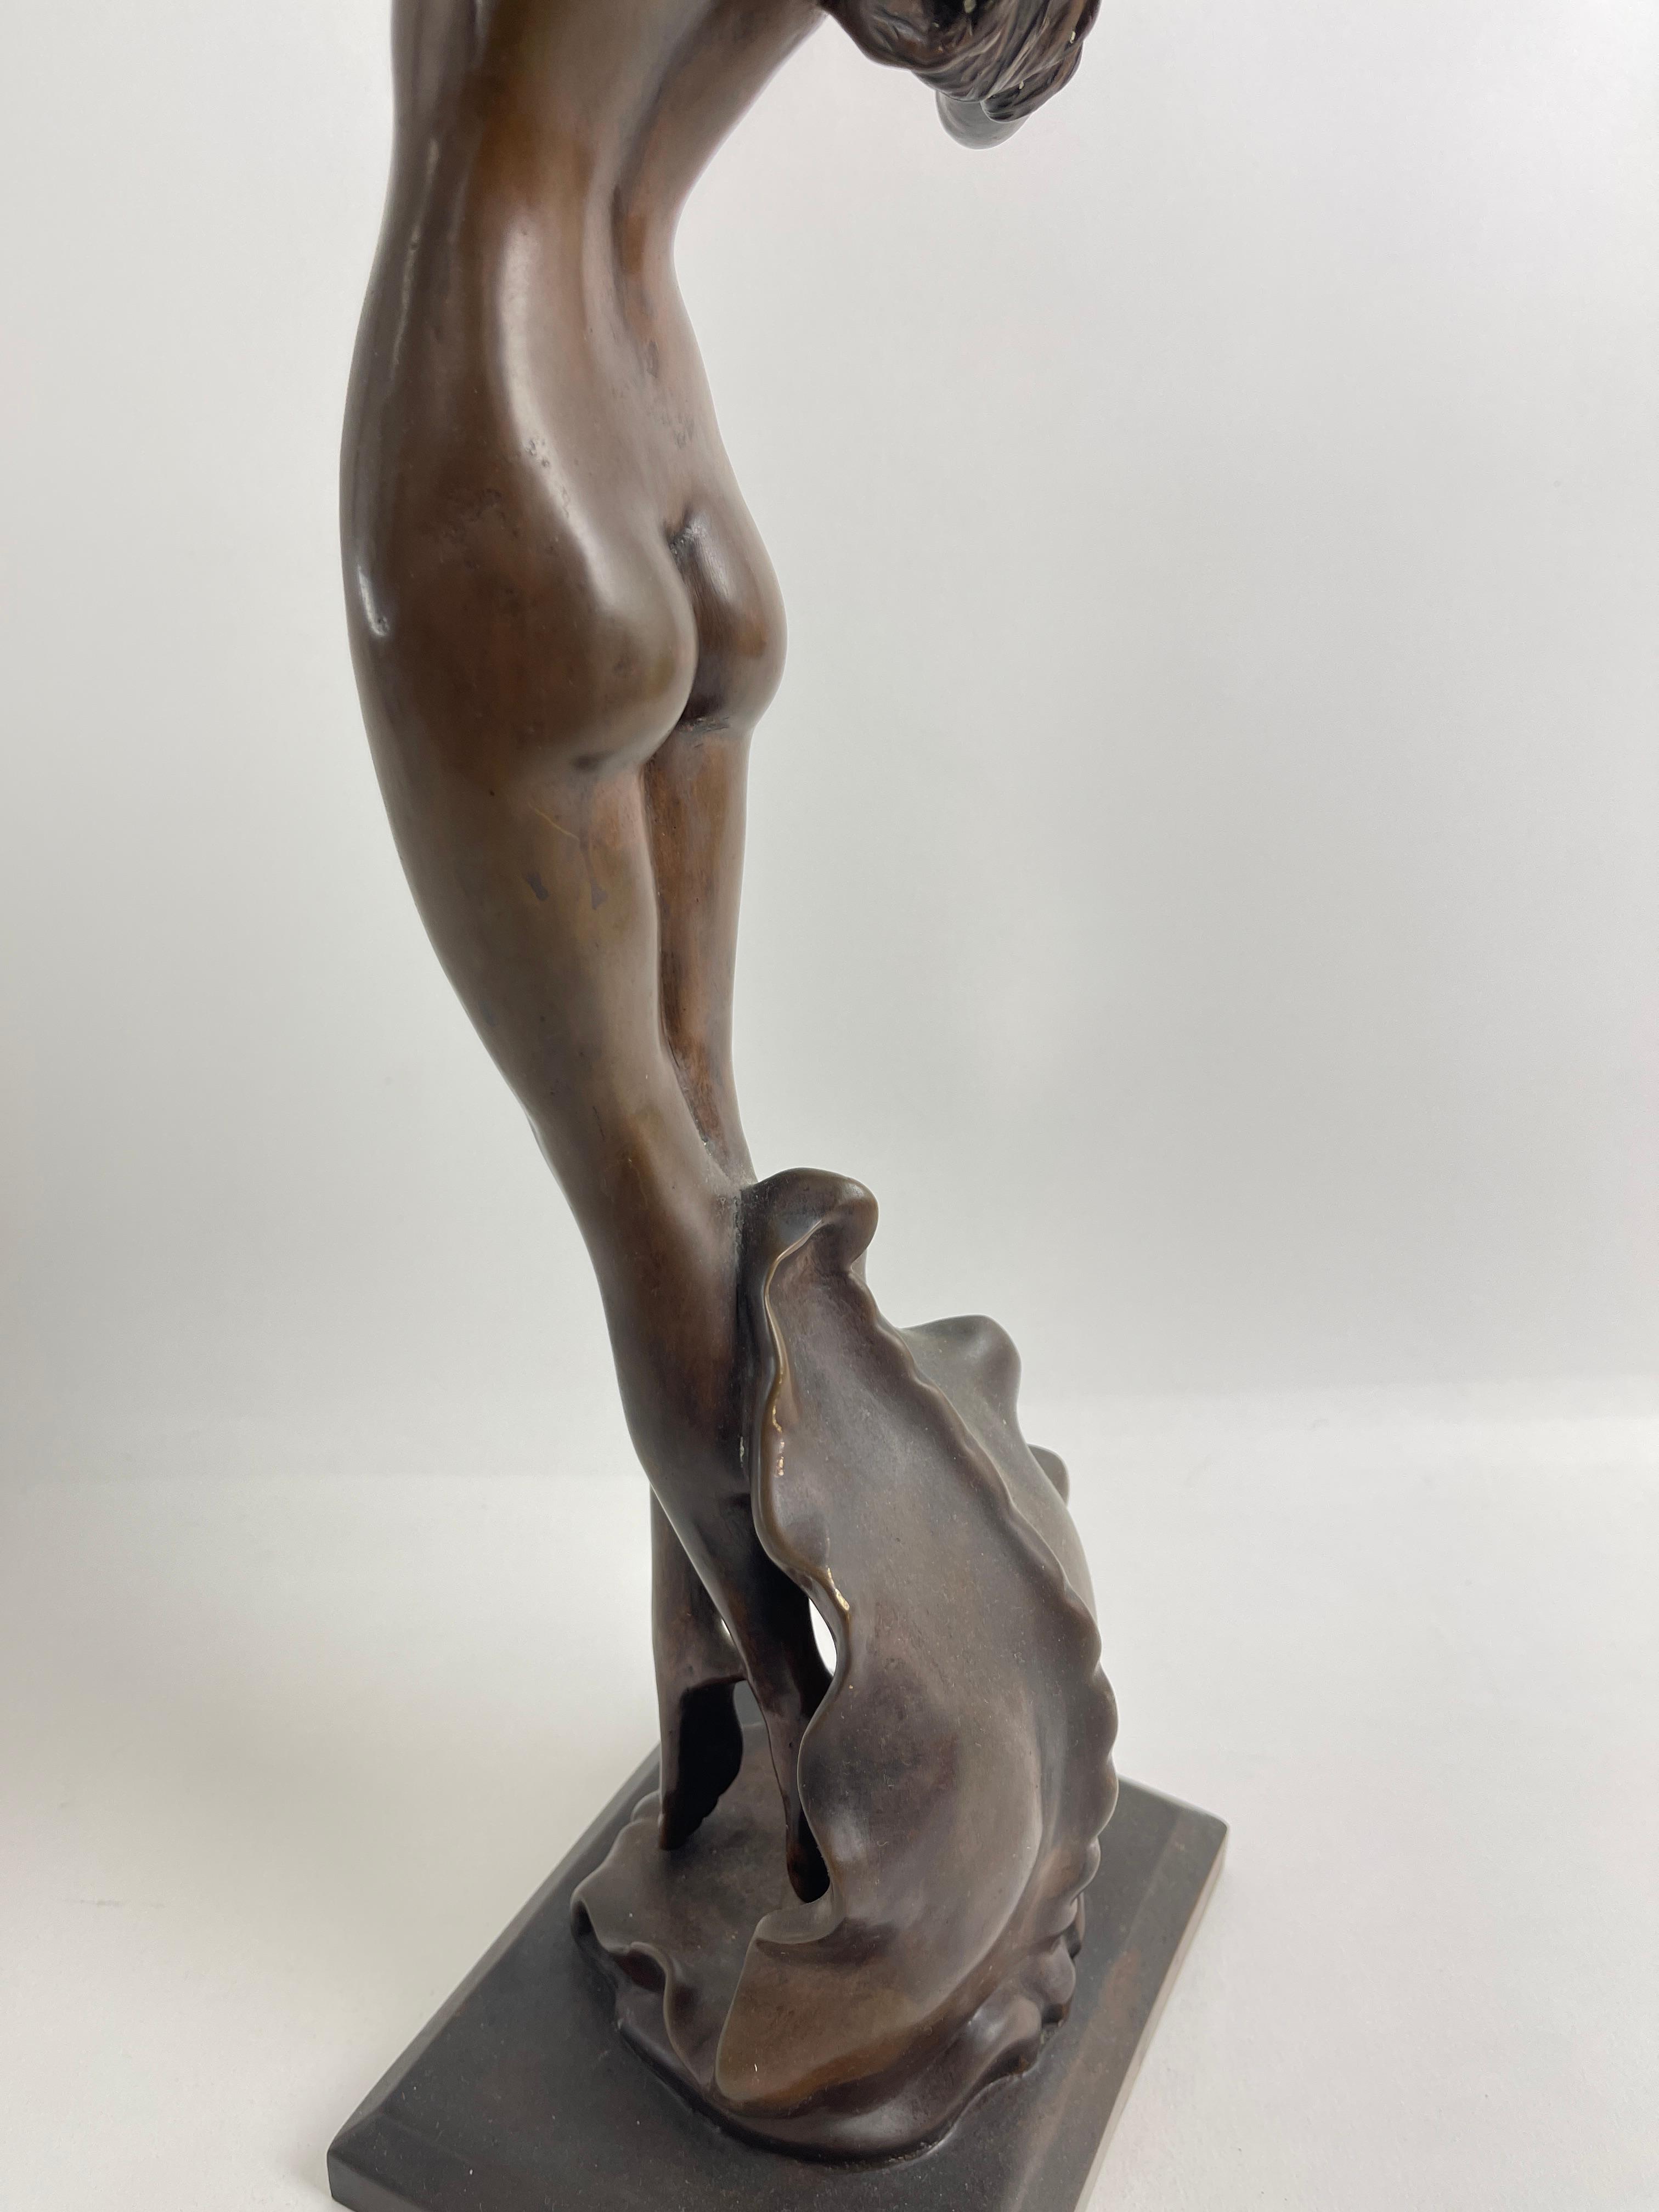 ANTIQUE BRONZE STATUE SIGNED NUDE WOMAN